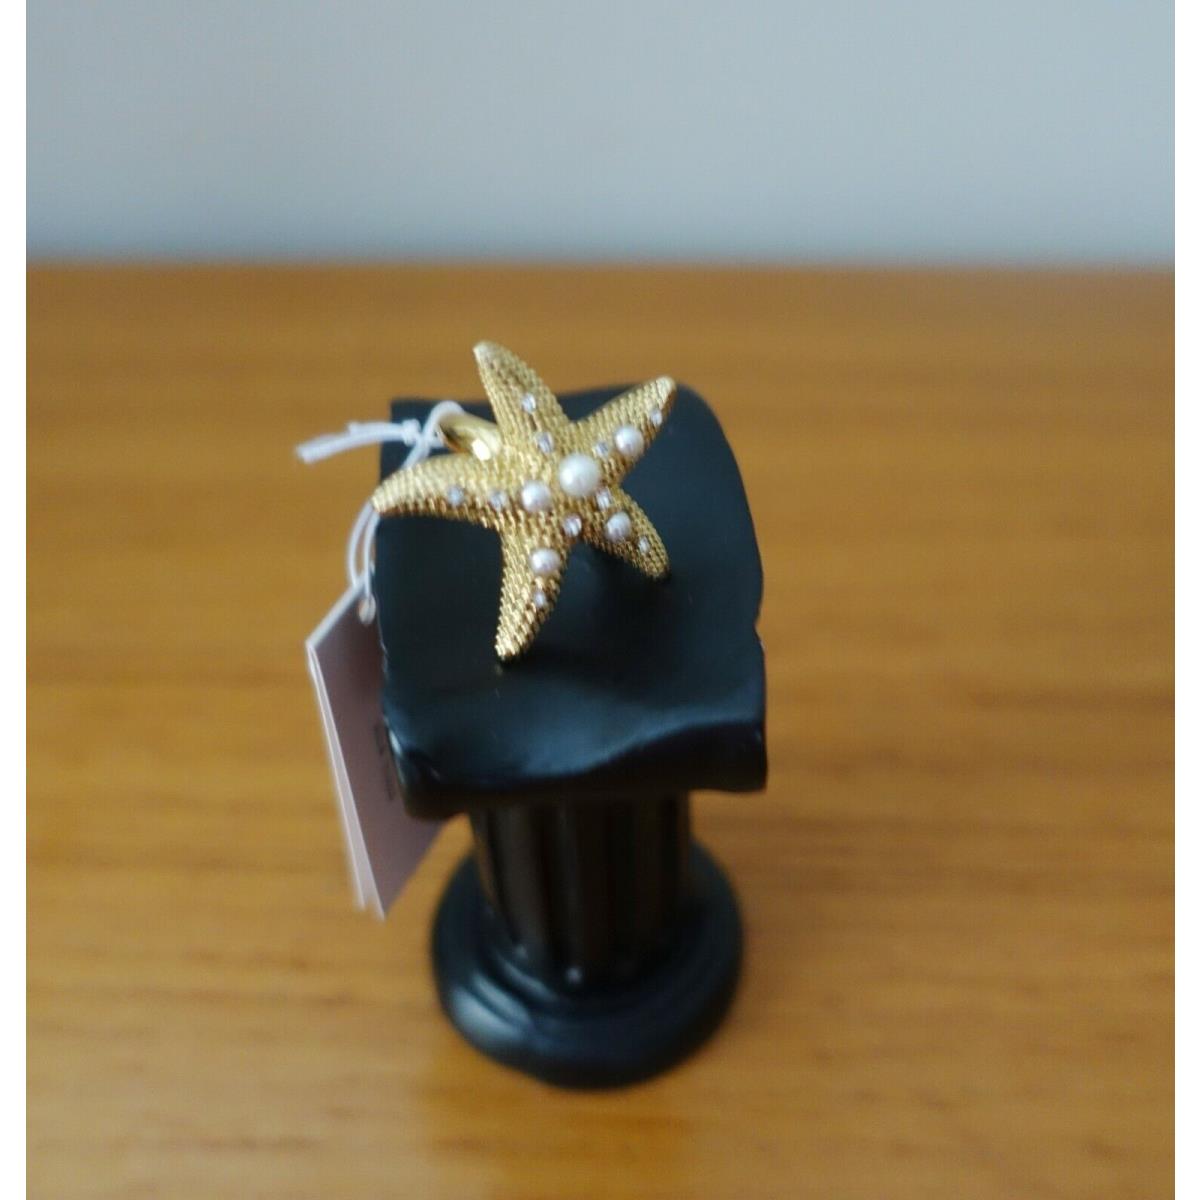 Kate Spade Sea Starfish with Stones Ring. Size 7